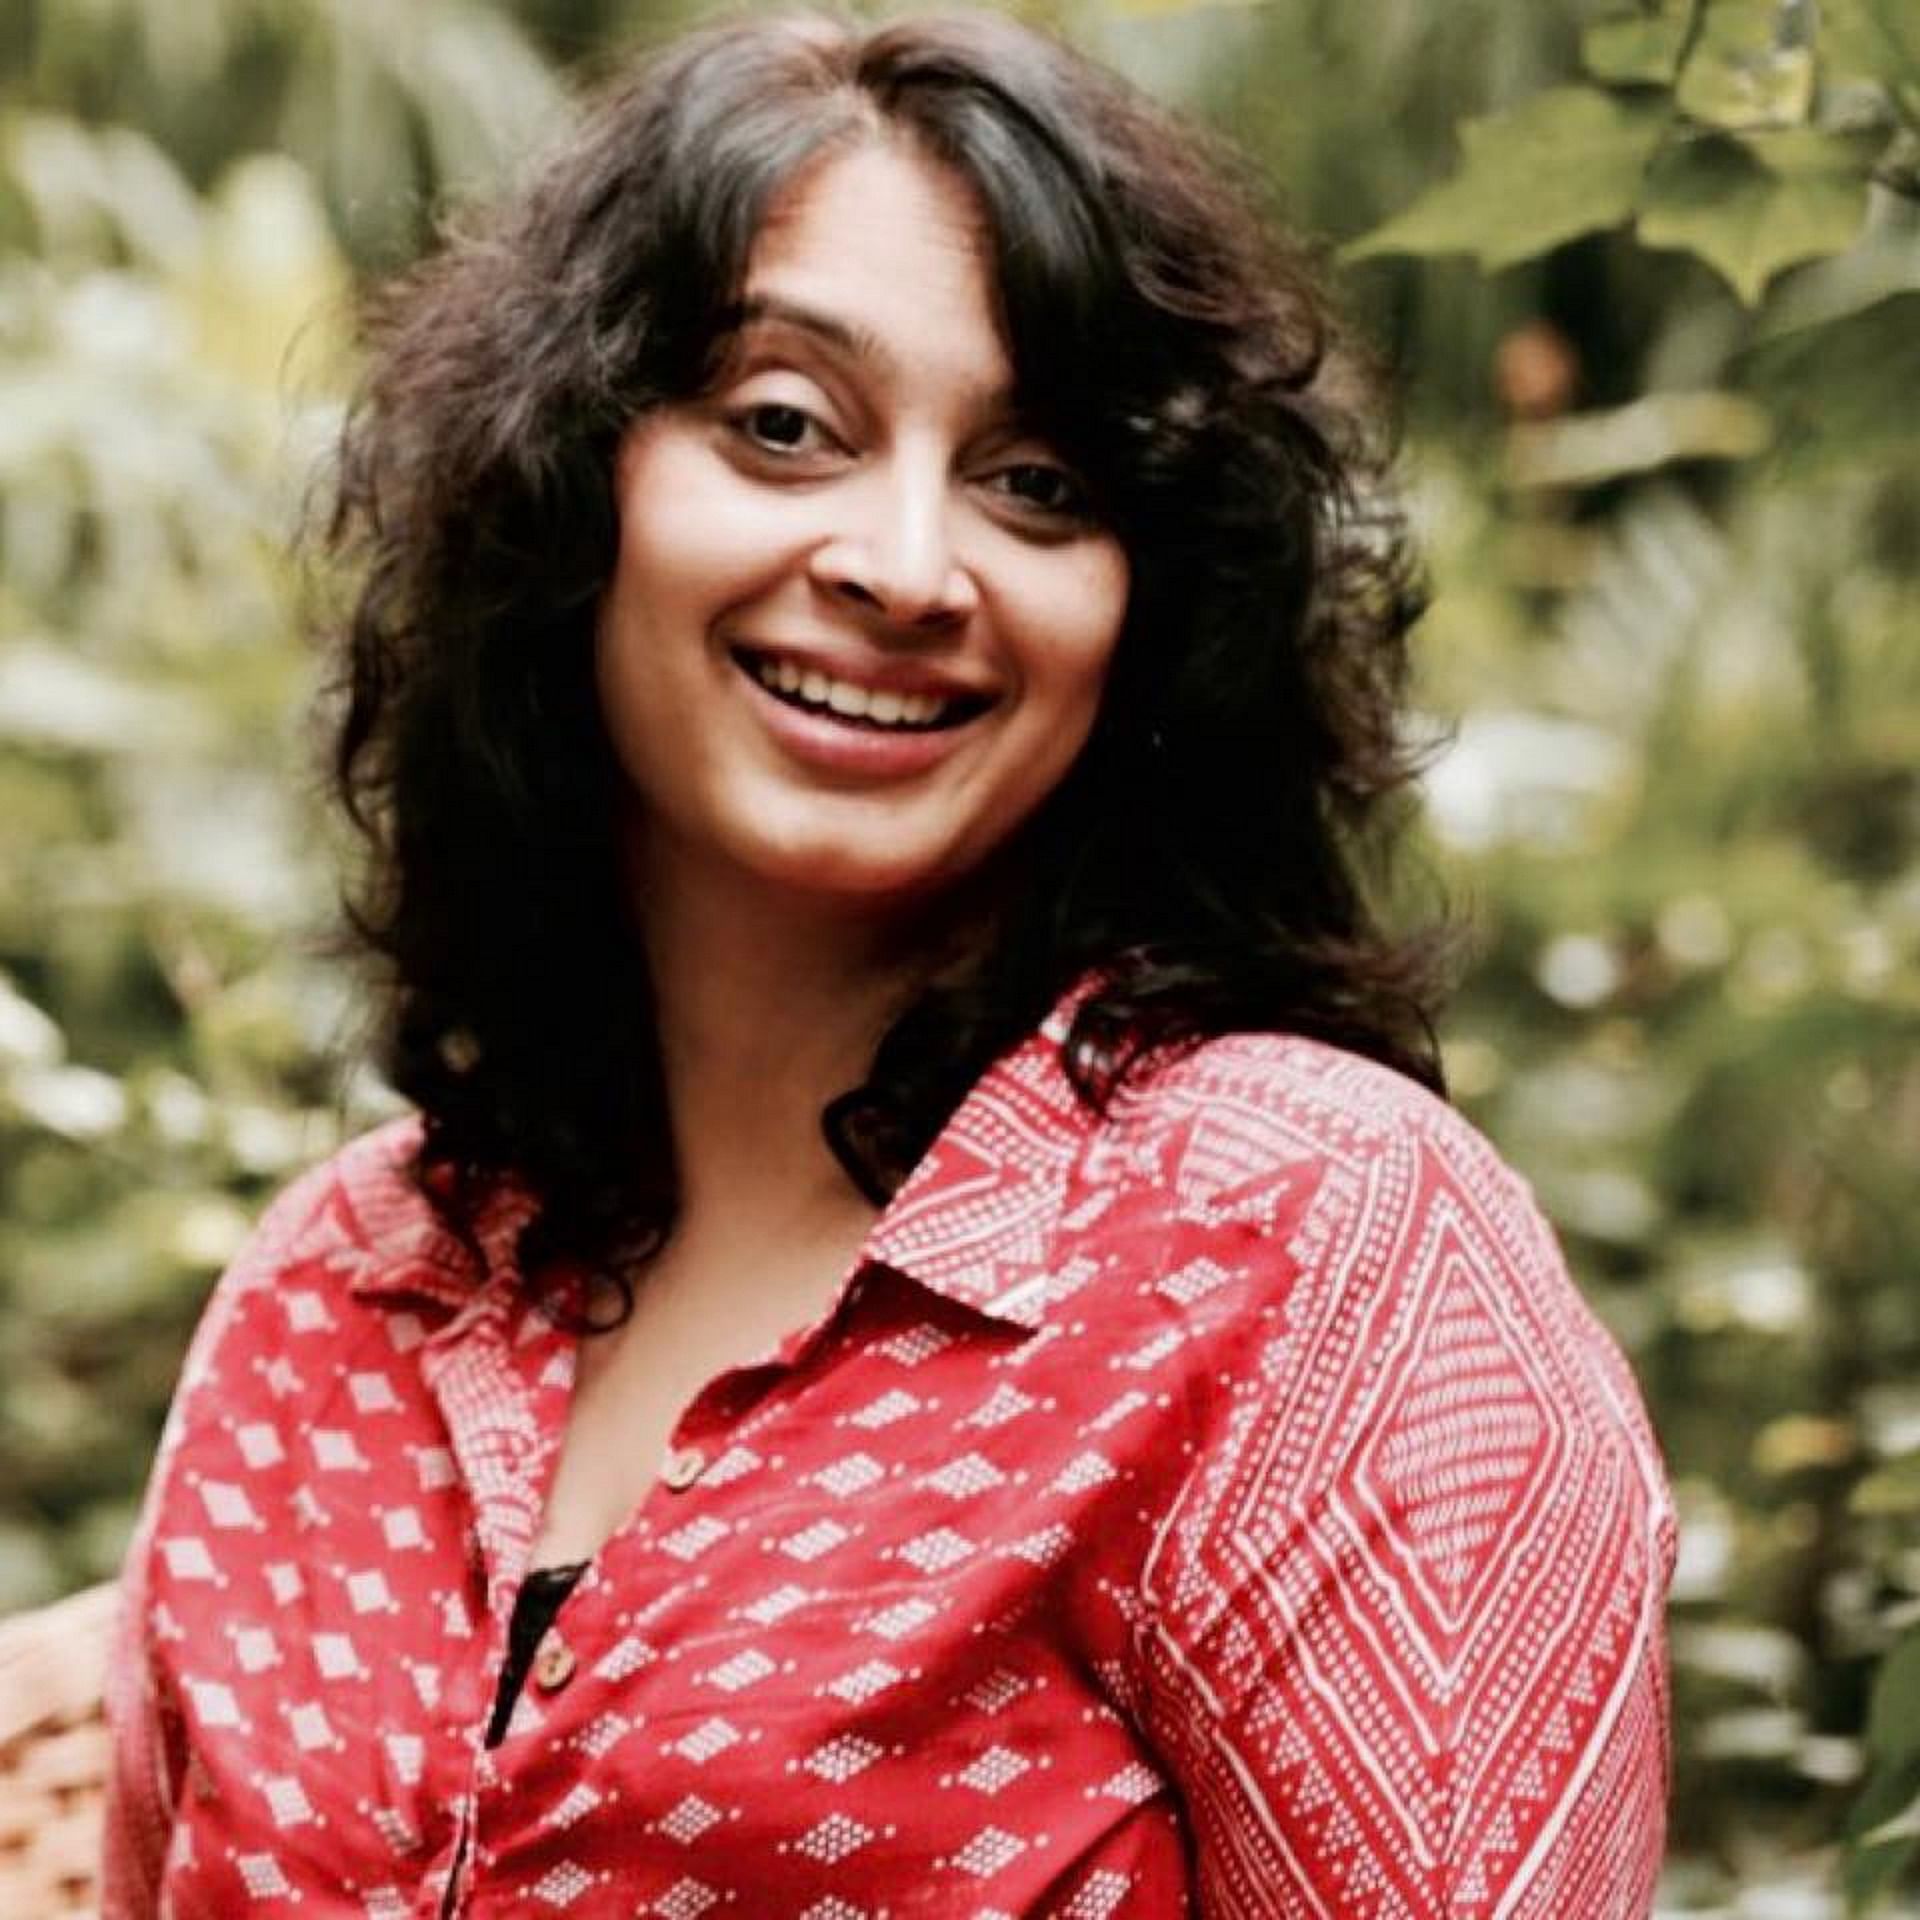 Anuja Ghosalkar founded ‘Drama Queen’ a theatre group focused on documentary theatre.